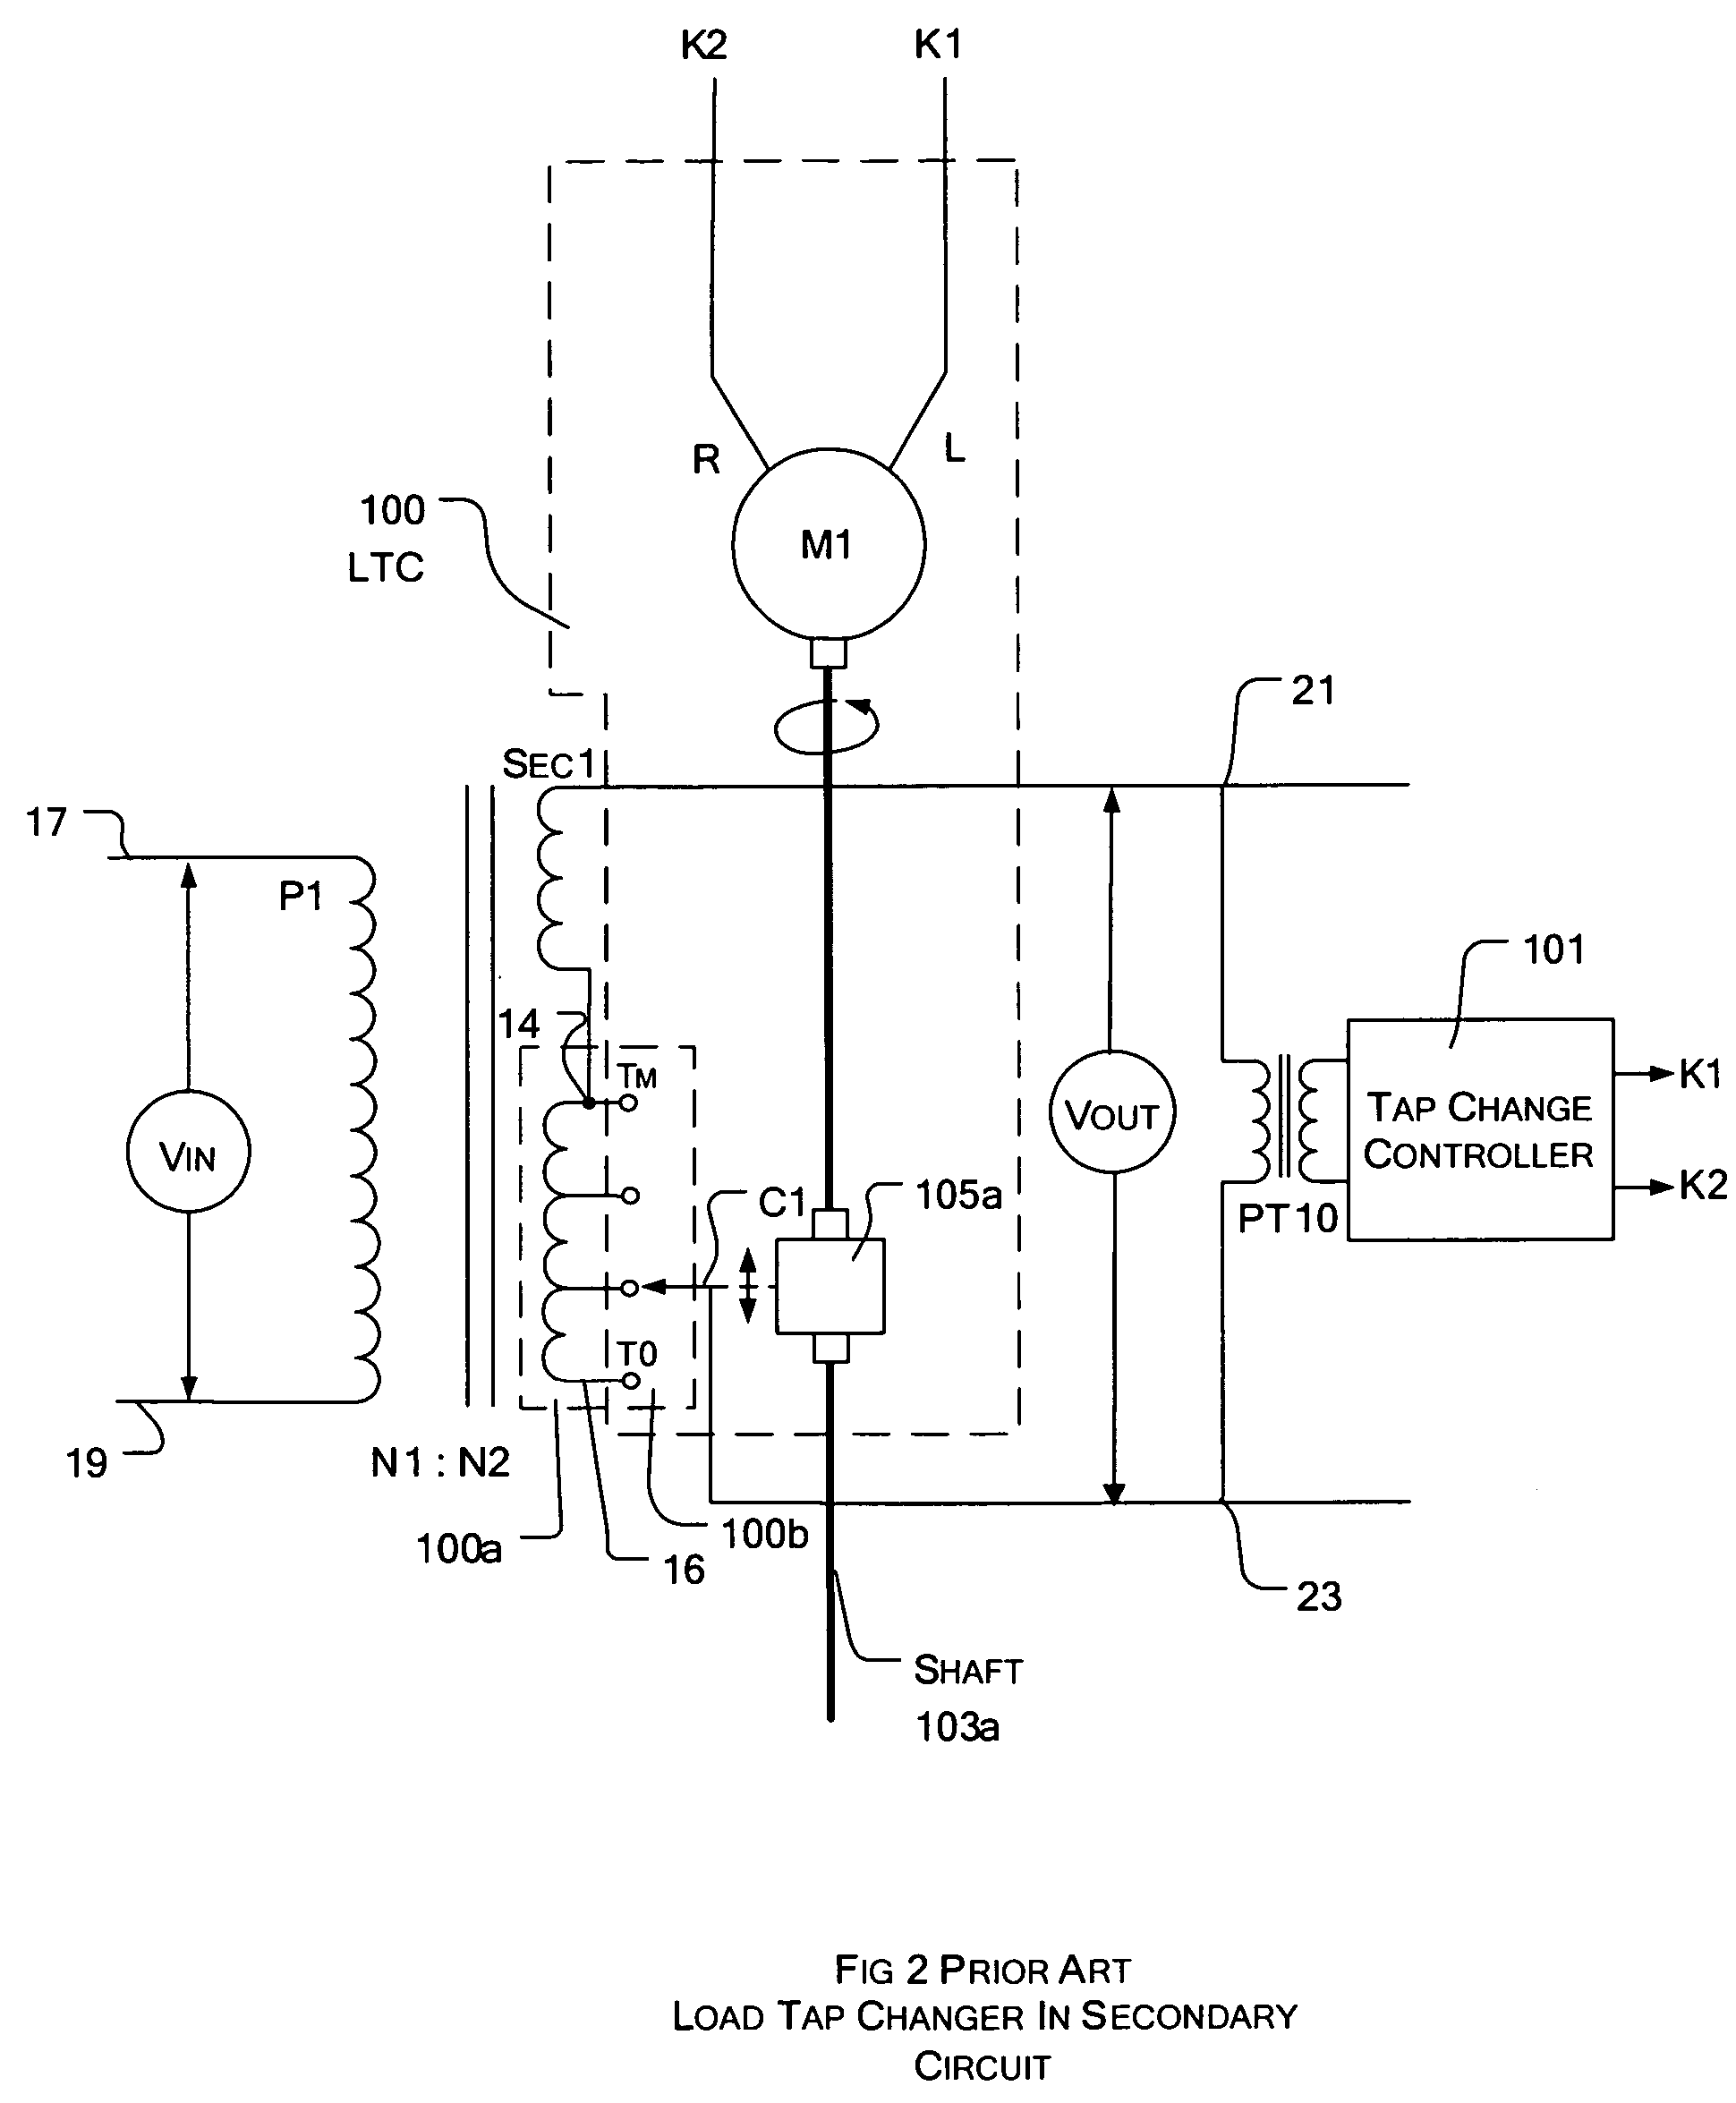 Apparatus and method for monitoring tap positions of load tap changer